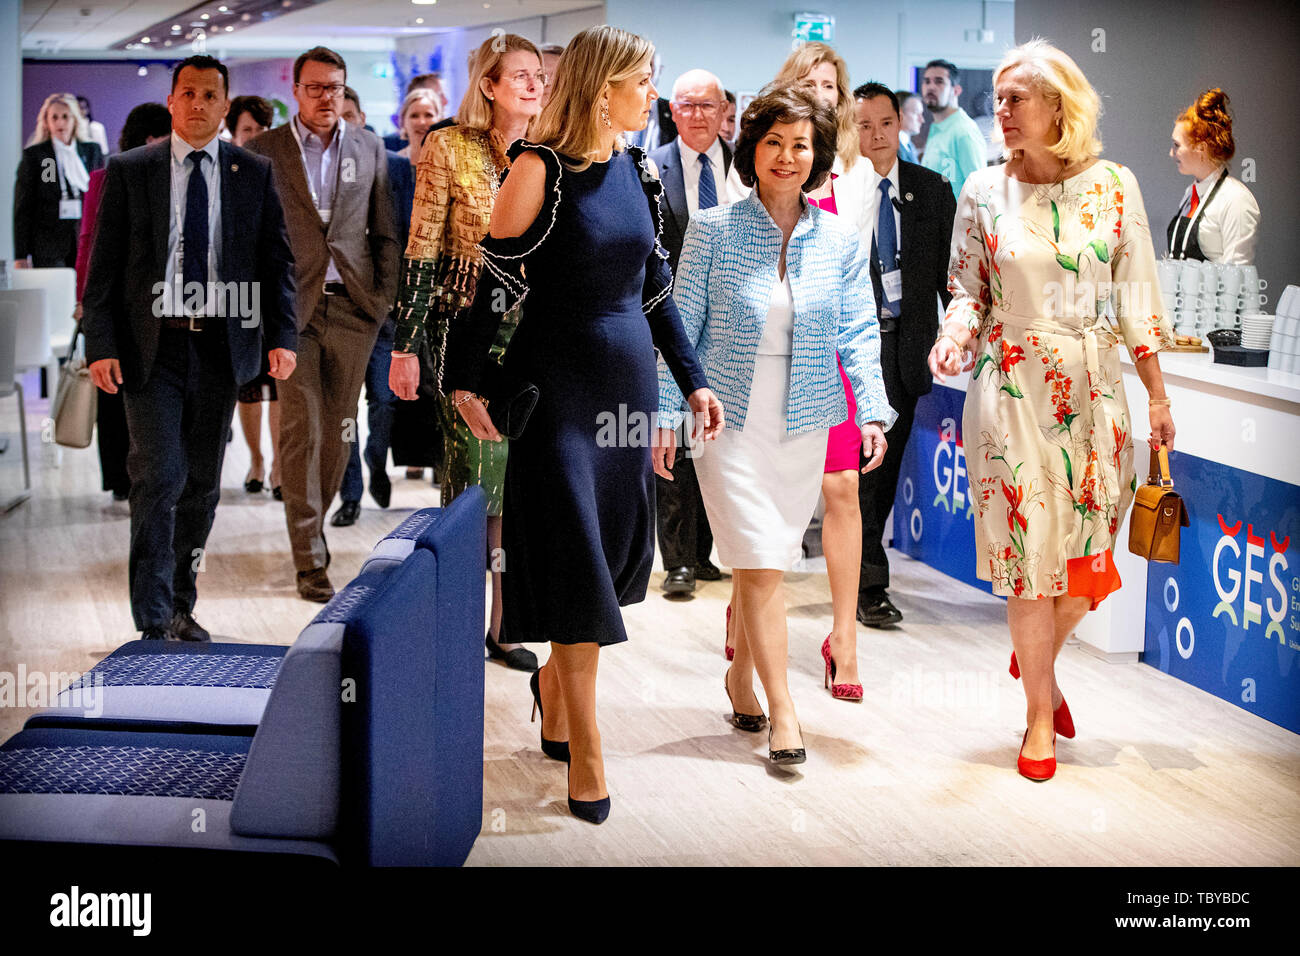 The Hague, The Netherlands. 4th June, 2019. Queen Maxima of The Netherlands attends the Global Entrepreneurship Summit (GES) in the World Forum in The Hague, The Netherlands, 4 June 2019. Credit: Patrick van Katwijk |/dpa/Alamy Live News Stock Photo